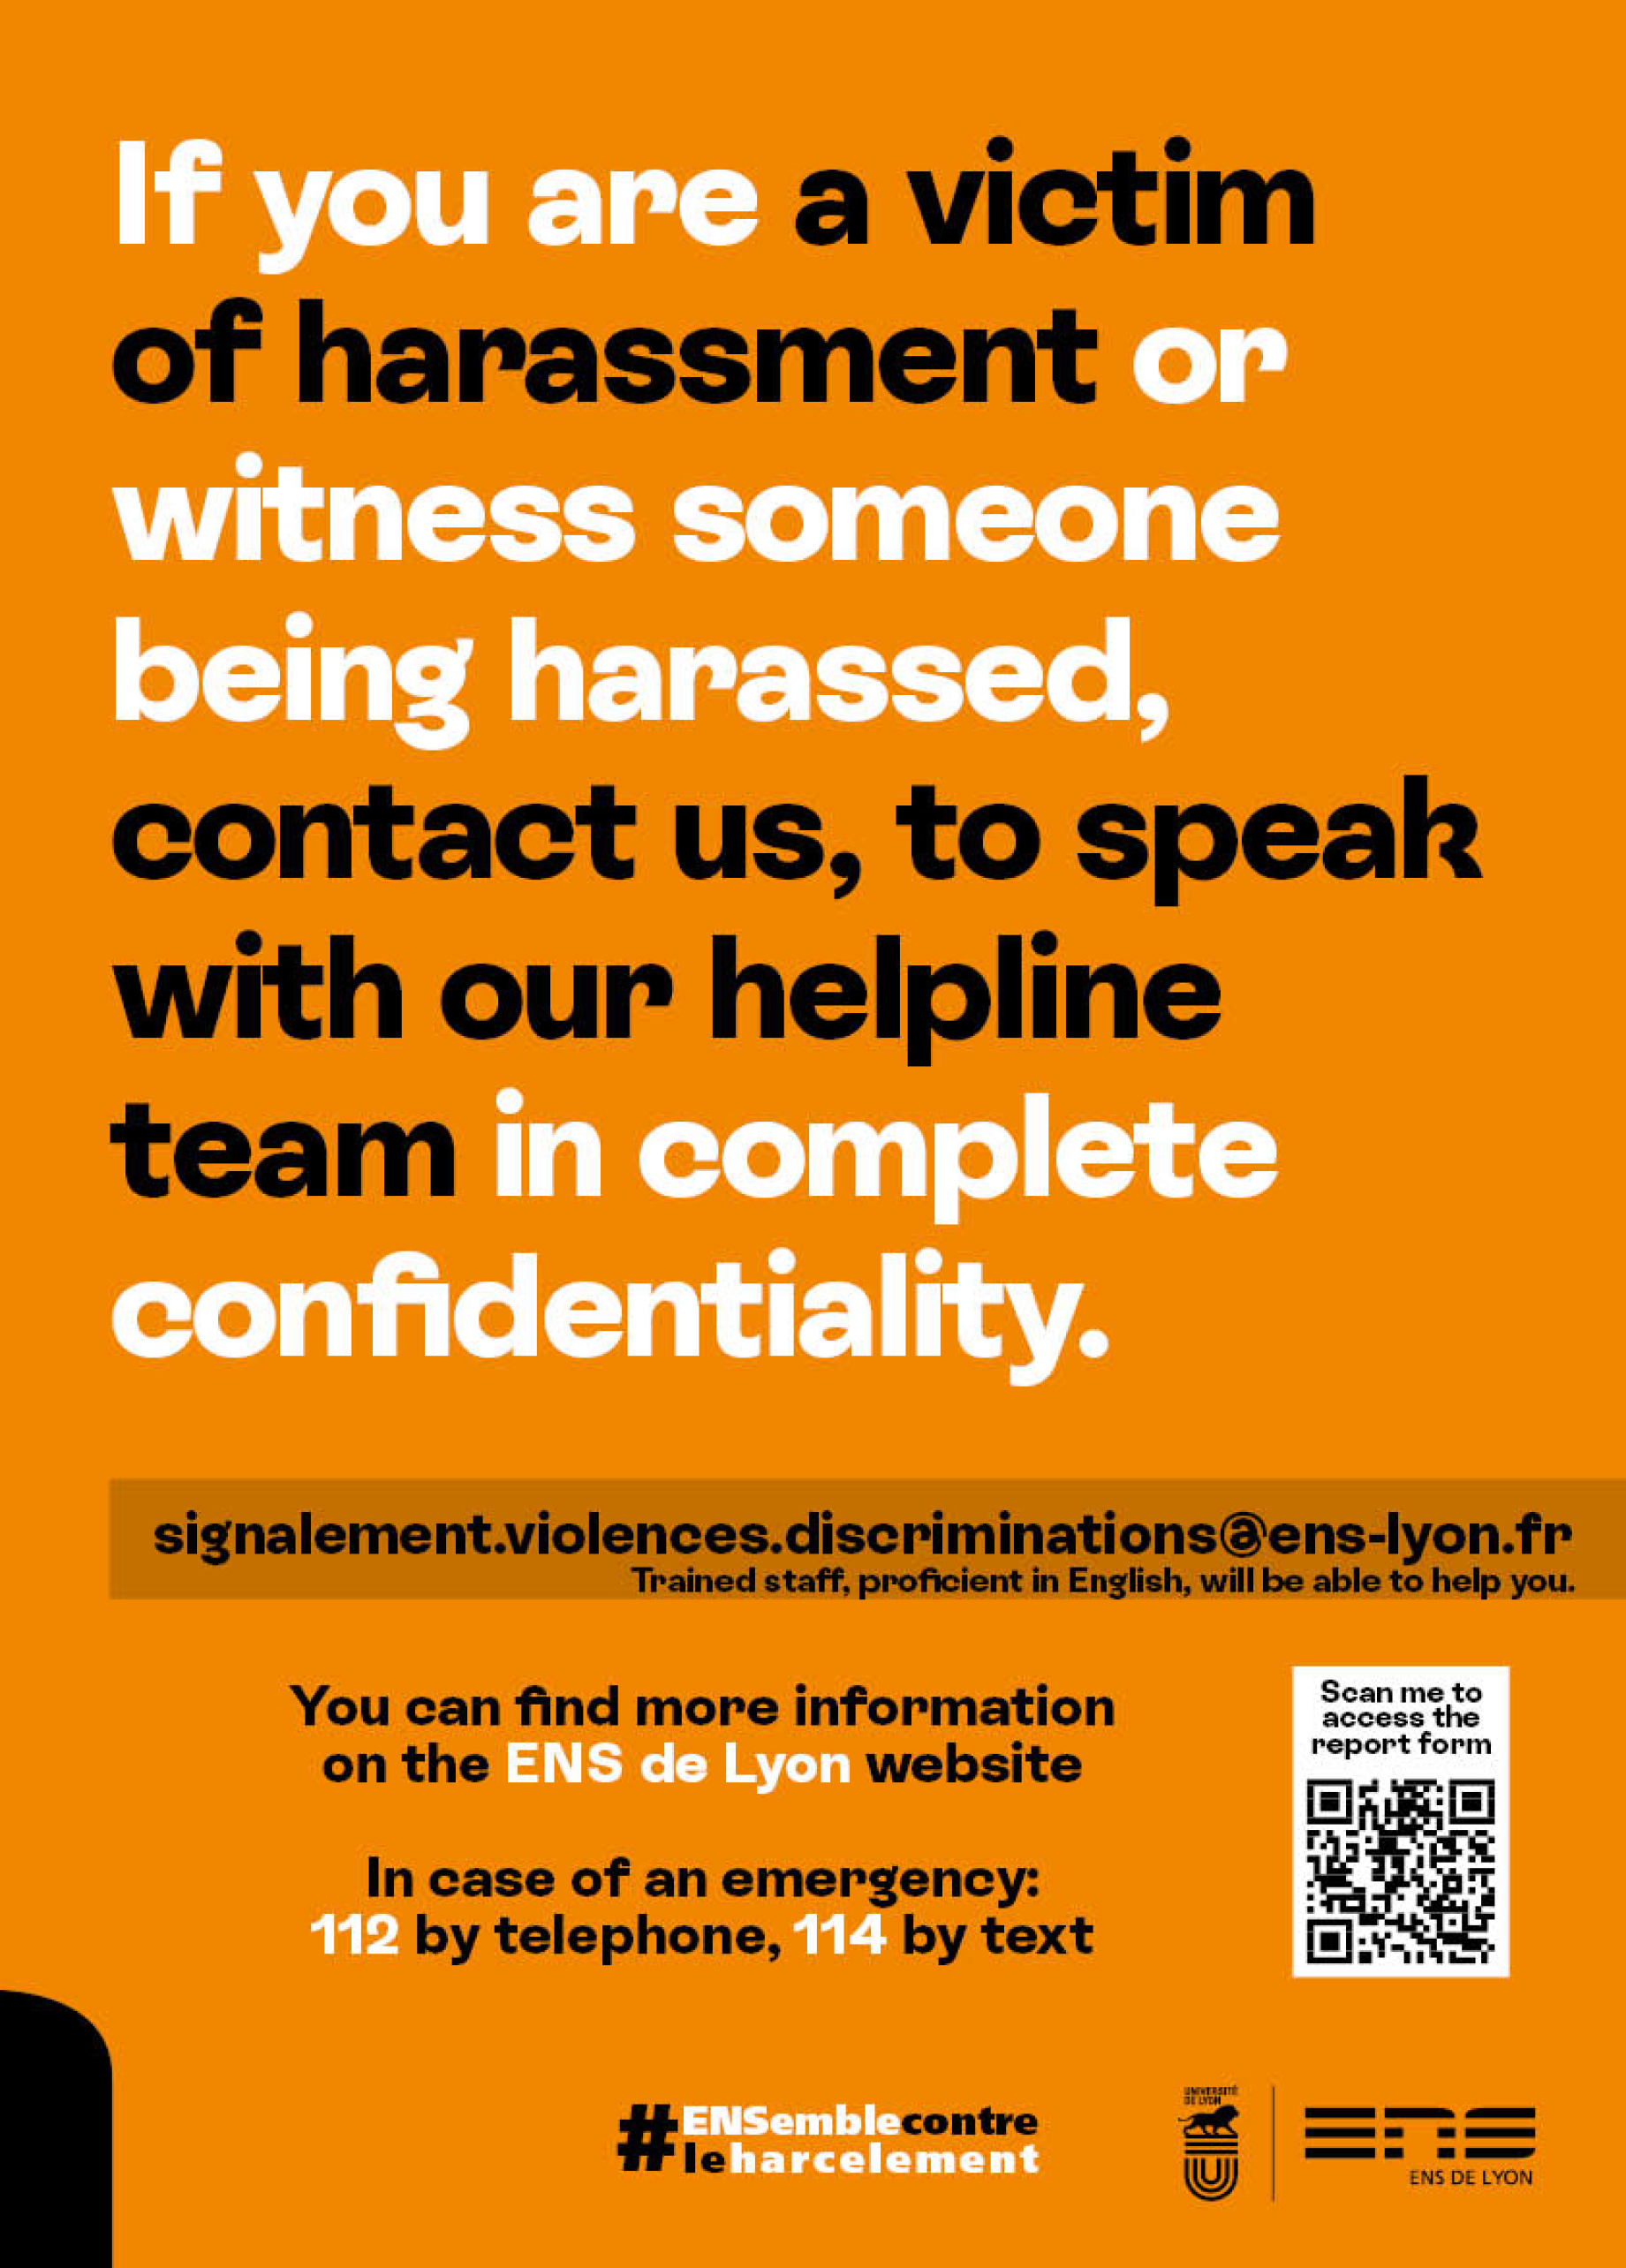 If you are a victim of harassment or witness someone being harassed, contact us, to speak with our helpline team in complete confidentiality. Email: signalement.violences.discriminations@ens-lyon.fr